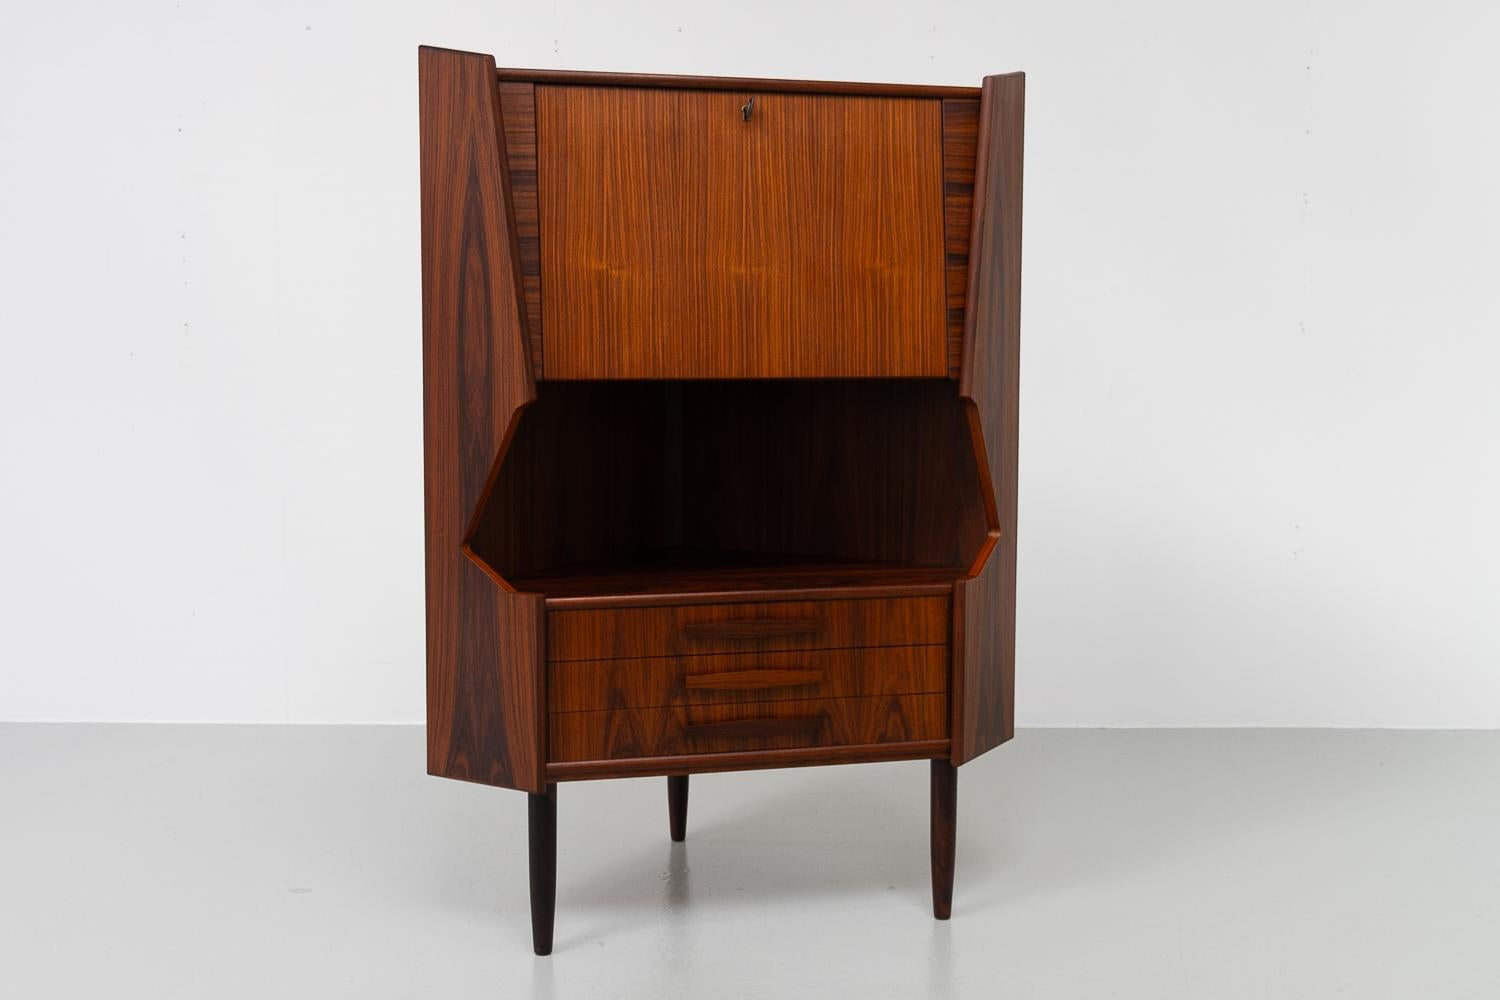 Vintage Danish rosewood corner cabinet with dry bar, 1960s.

Scandinavian Mid-Century Modern corner cabinet with bar unit and drawers. Drinks cabinet behind drop down door with lock and key. Inside is decorated mirror and curved shelf. Amble space